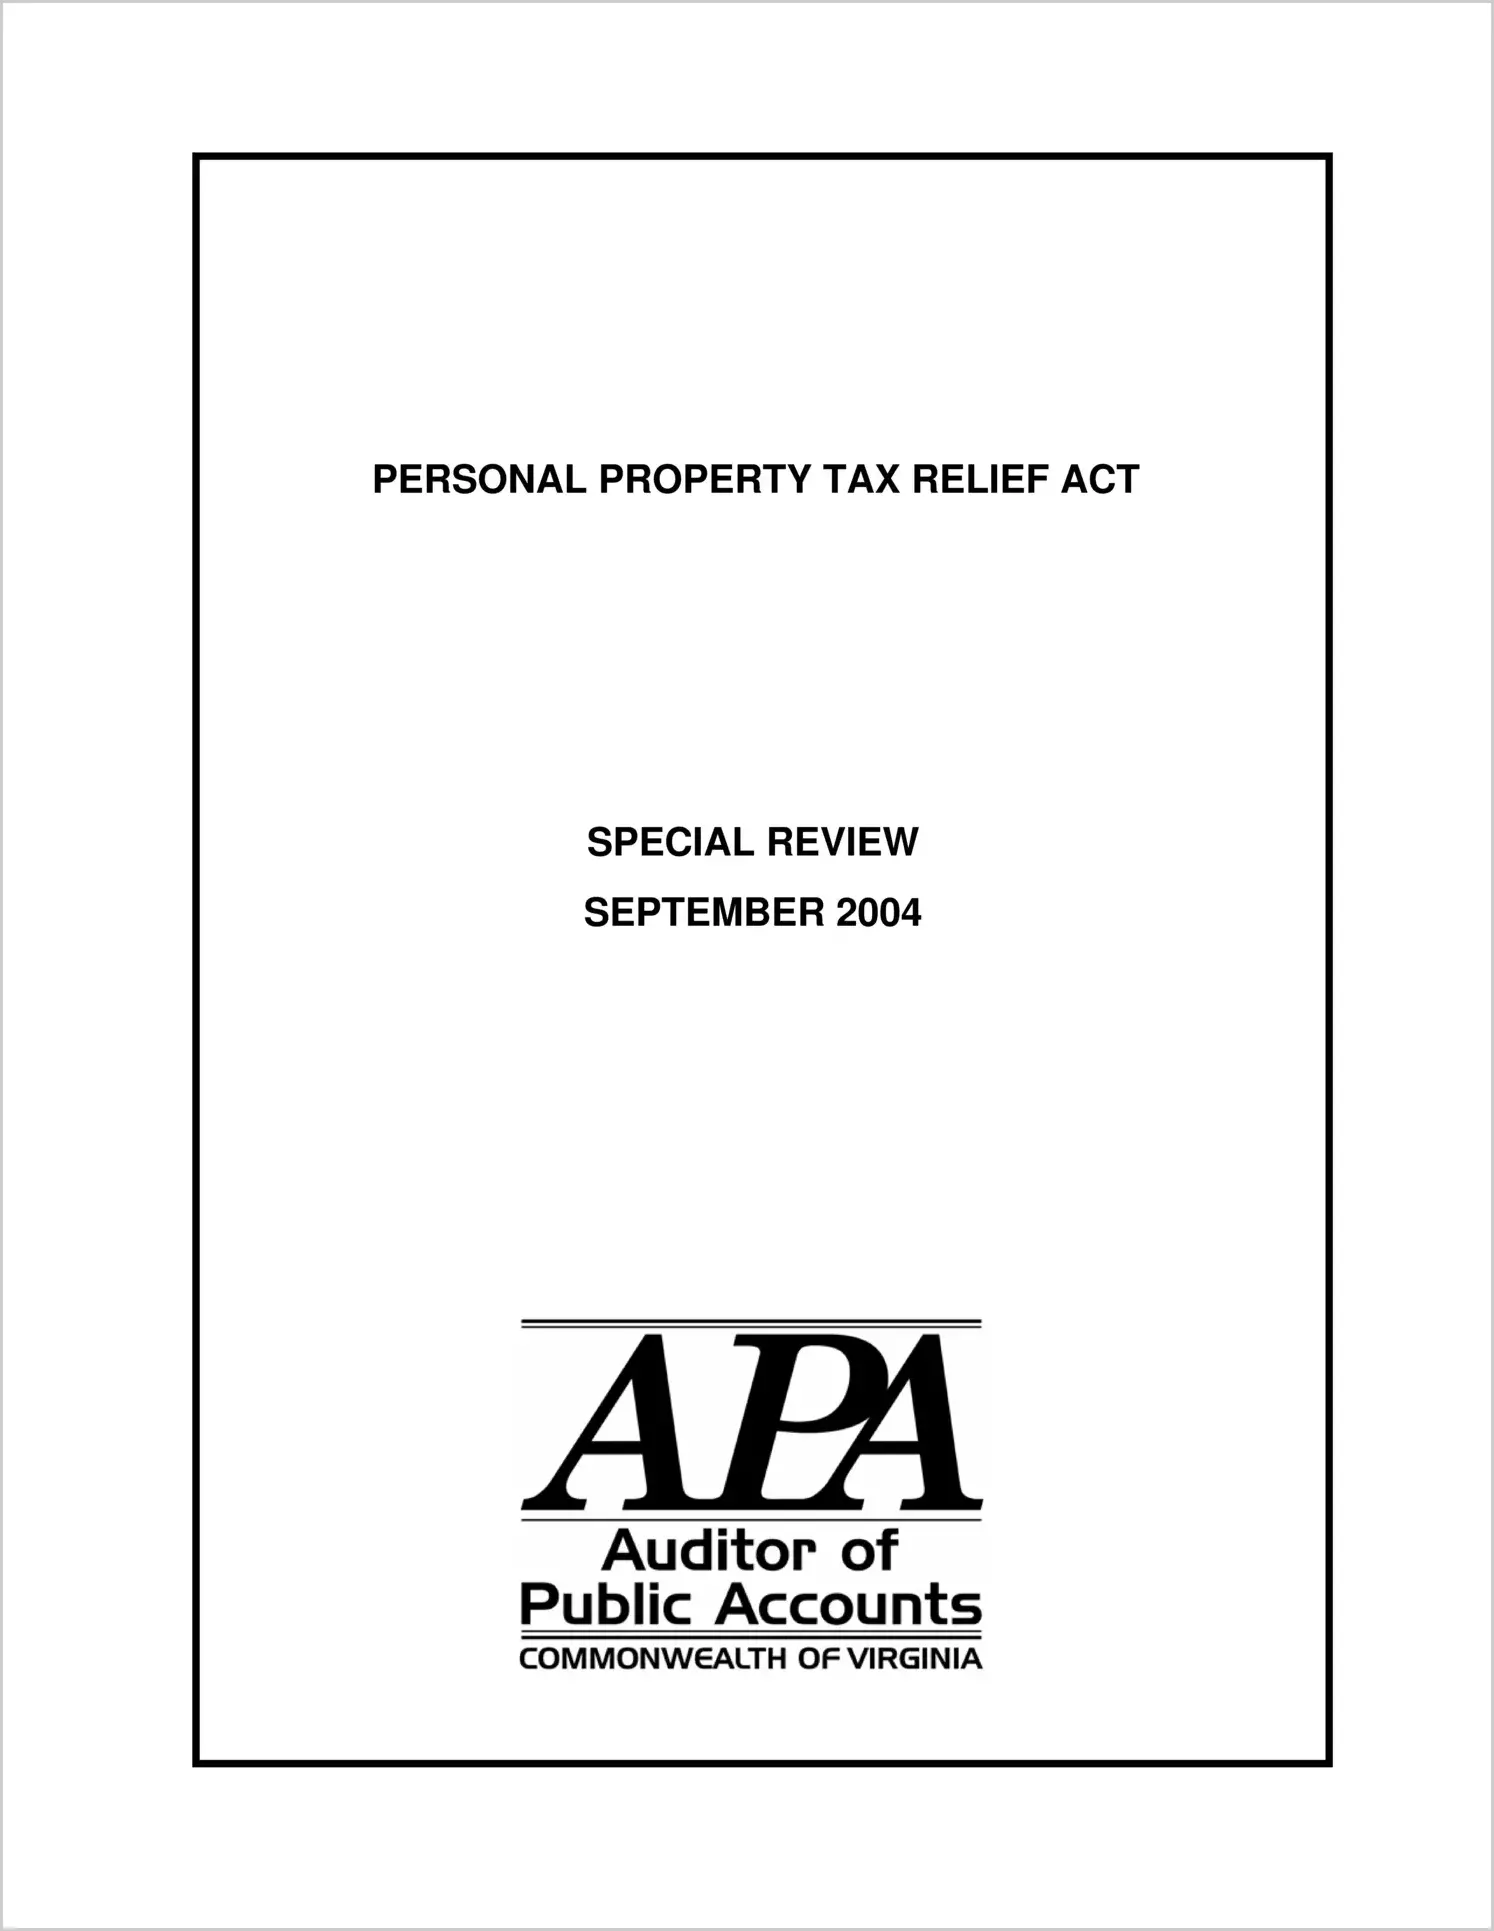 Special ReportPersonal Property Tax Relief Act Special Review (Report Date: September 2004)